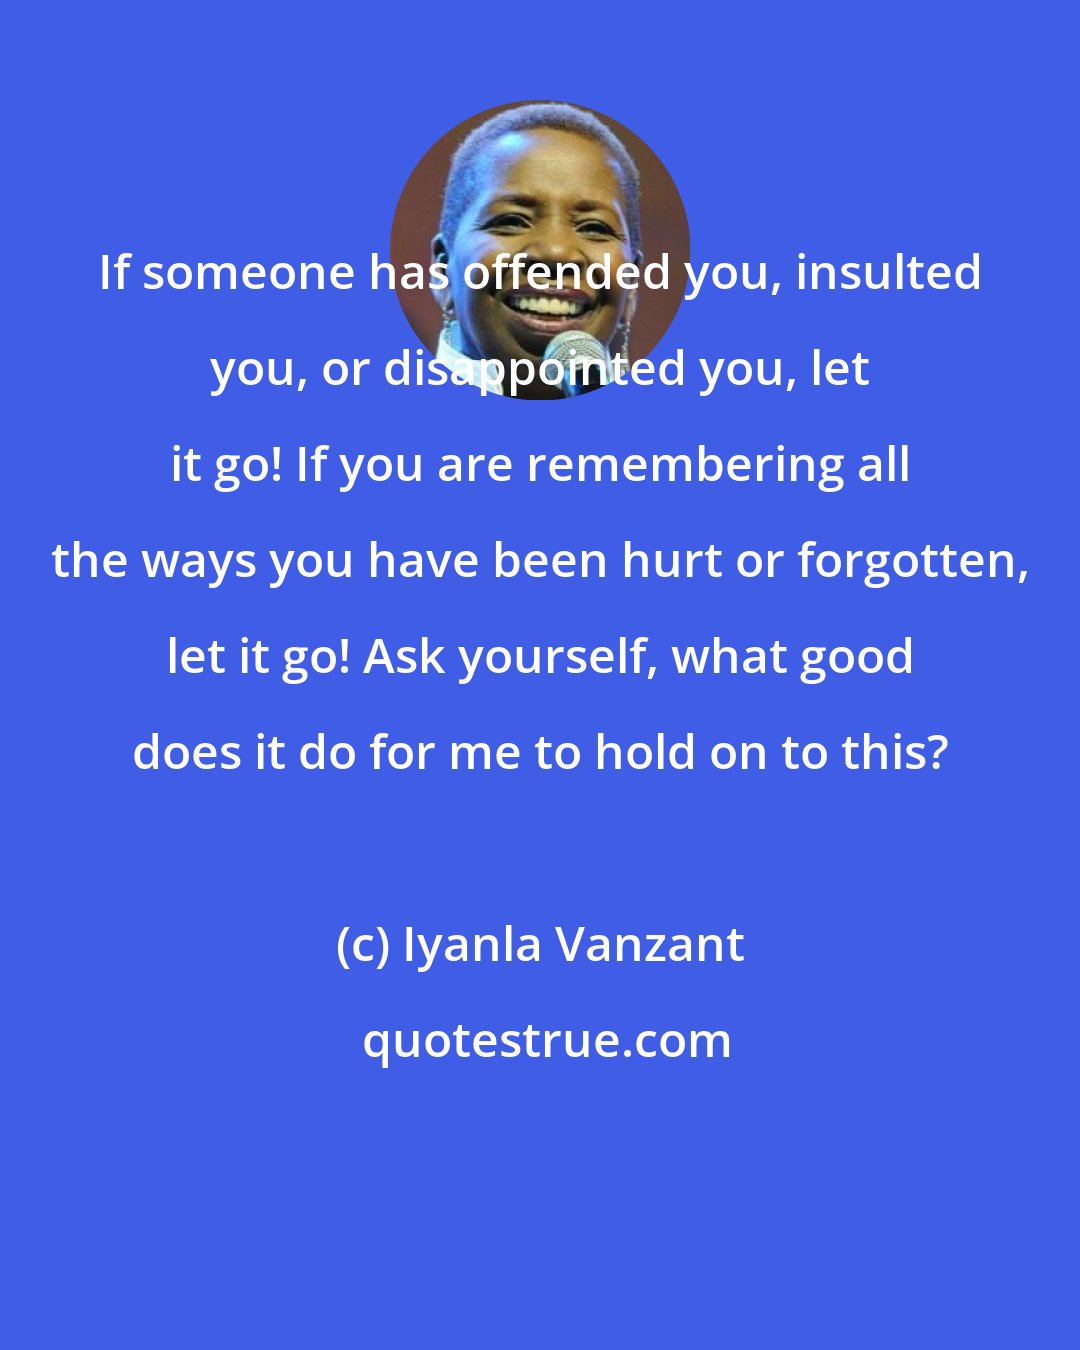 Iyanla Vanzant: If someone has offended you, insulted you, or disappointed you, let it go! If you are remembering all the ways you have been hurt or forgotten, let it go! Ask yourself, what good does it do for me to hold on to this?